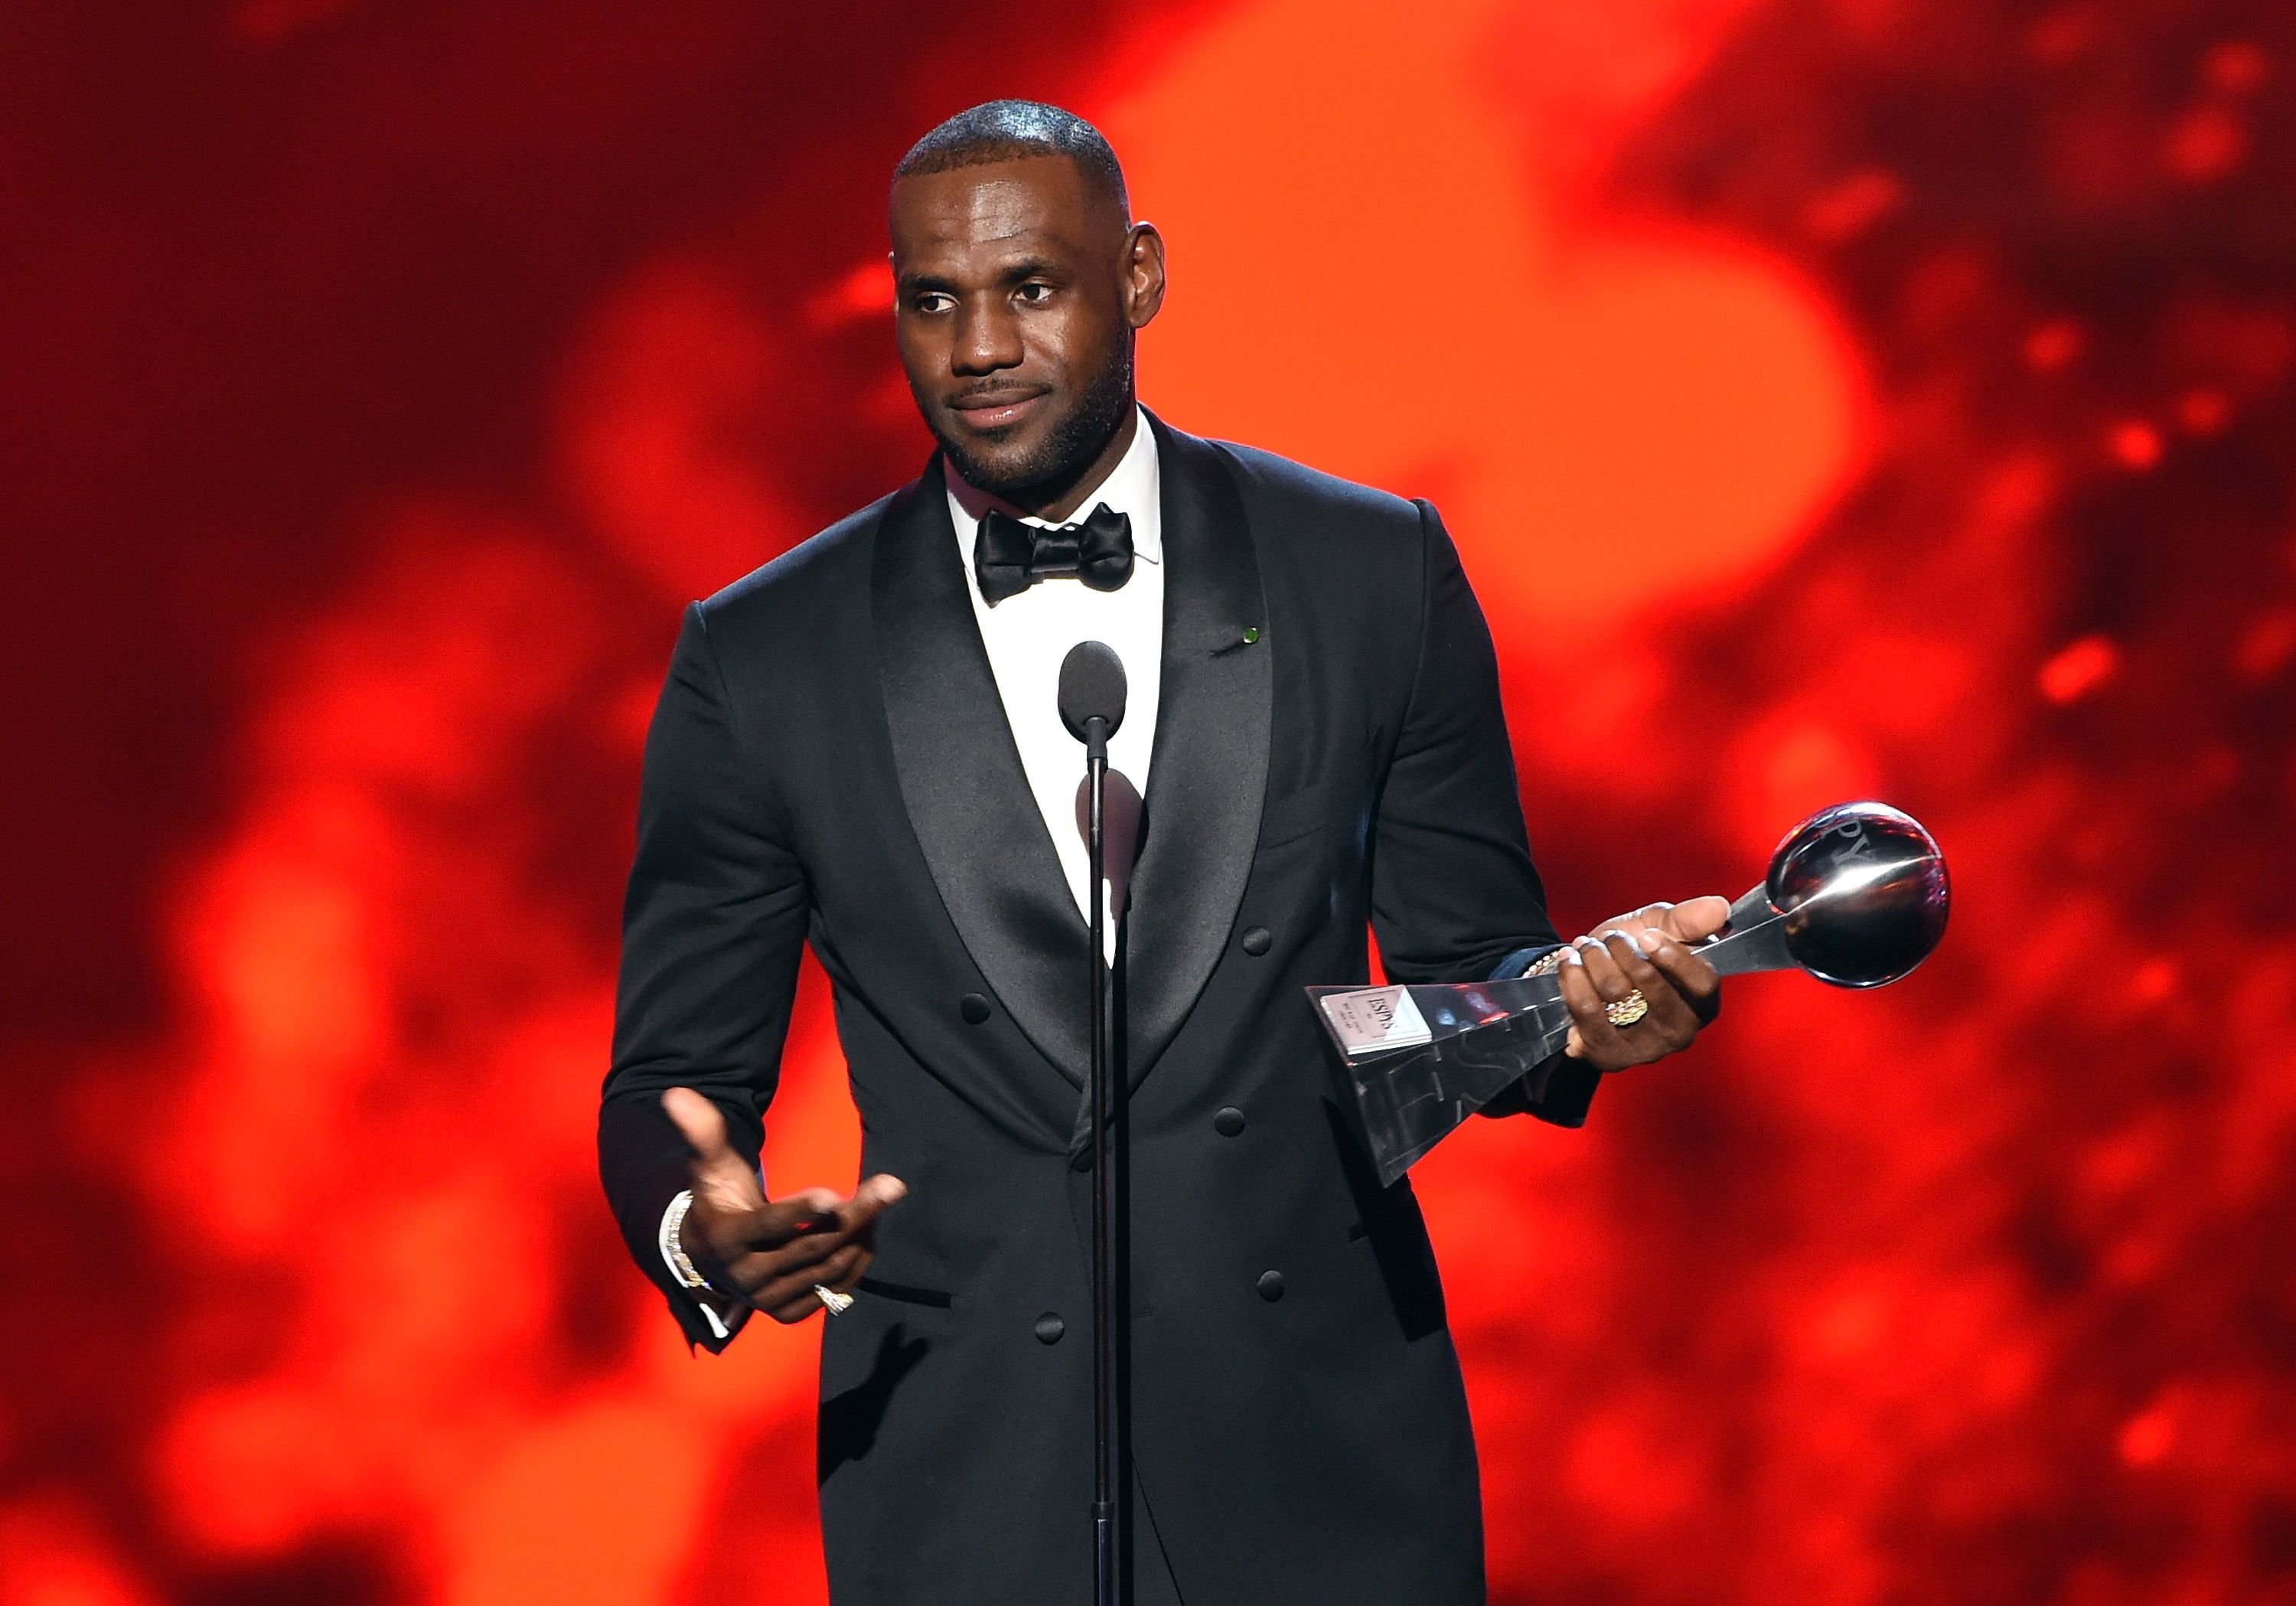 NBA player LeBron James accepts the Best Male Athlete award during the 2016 ESPYS at the Microsoft Theater on July 13, 2016, in LA, California | Photo: Getty Images